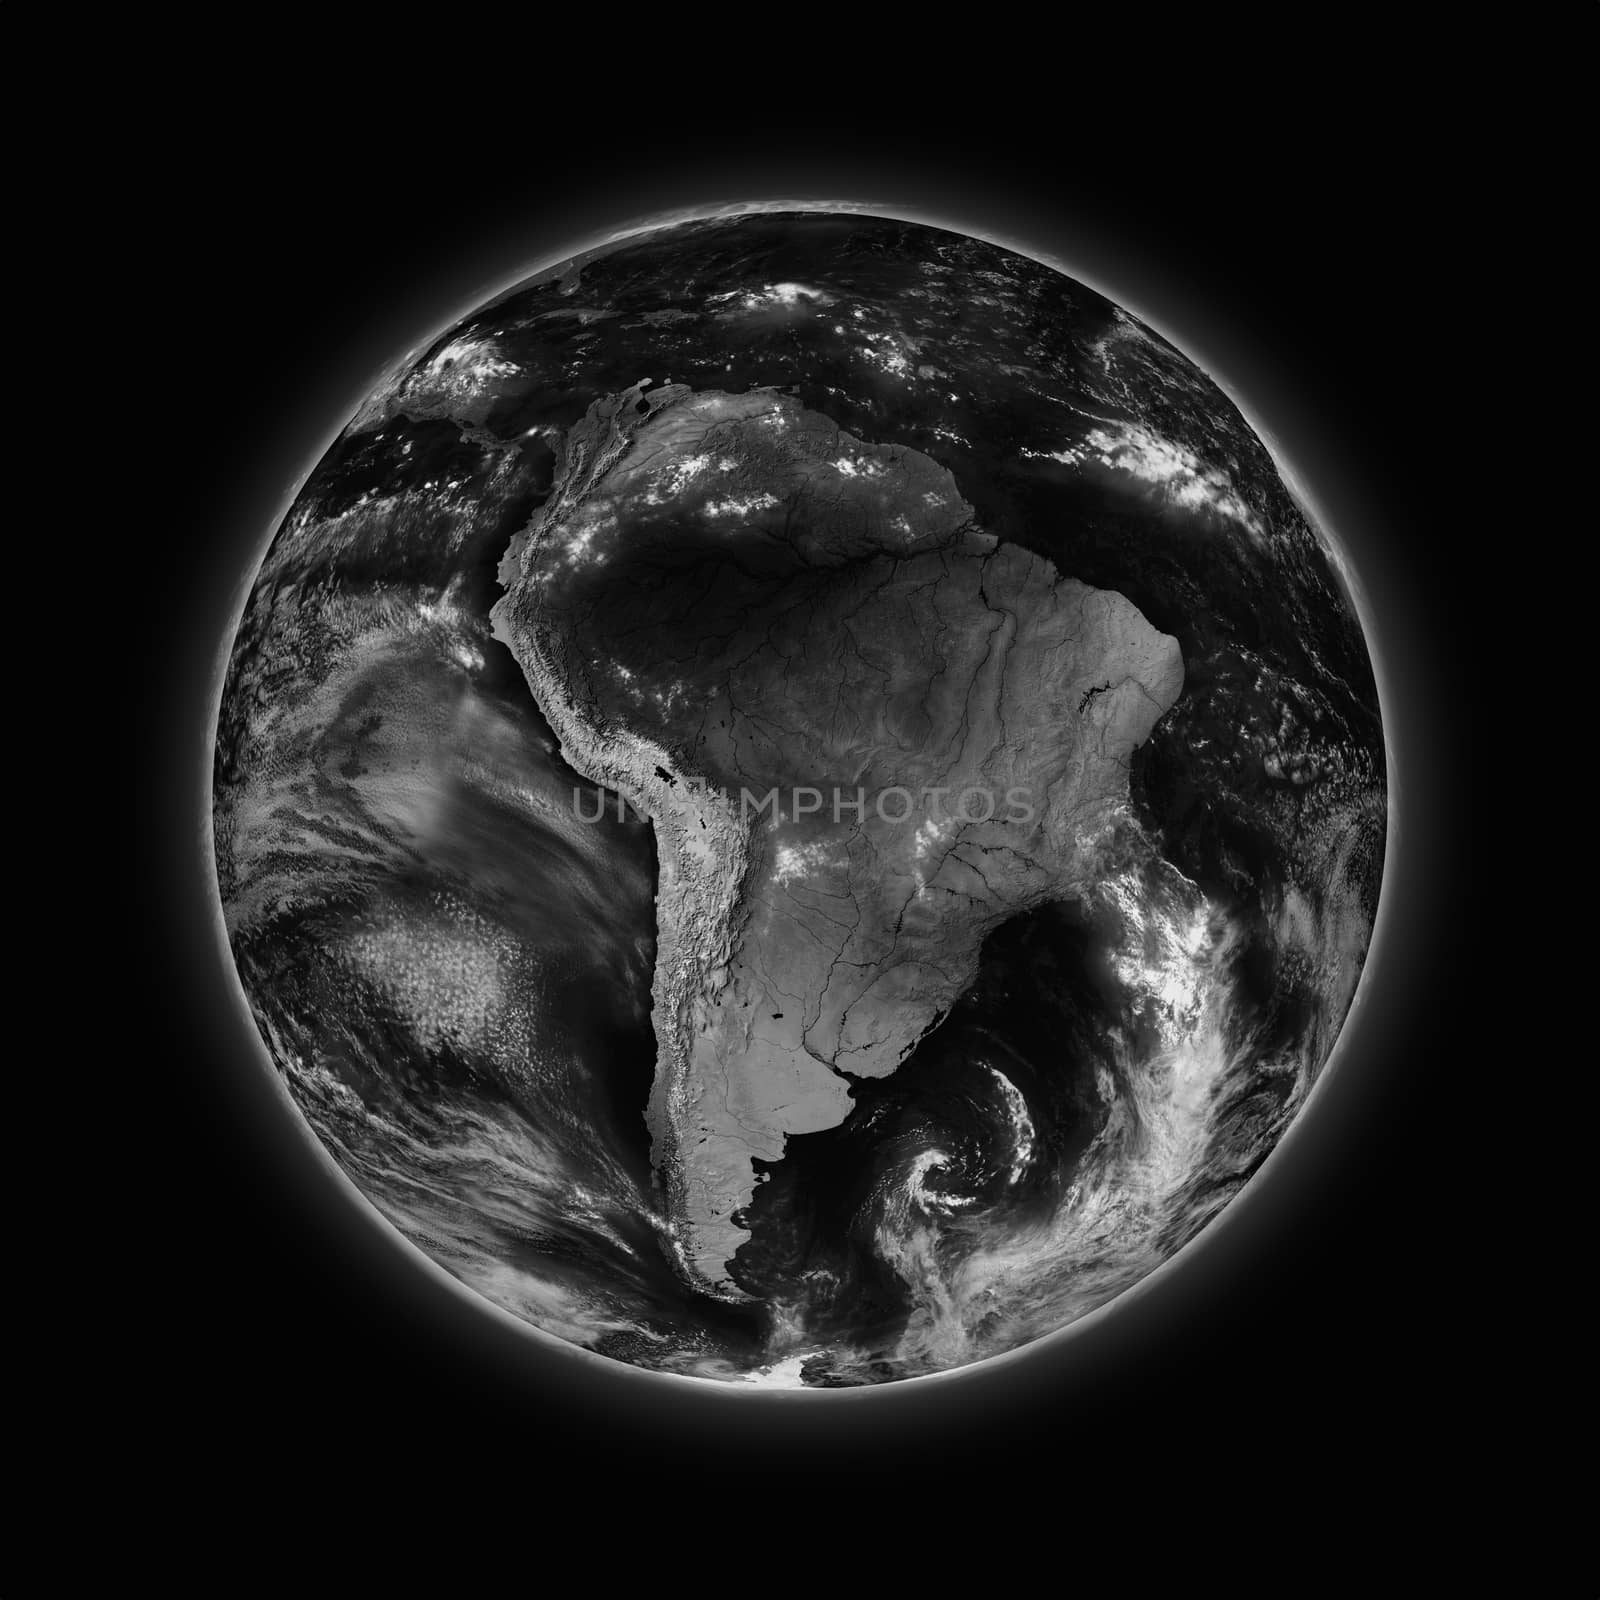 South America on dark planet Earth by Harvepino